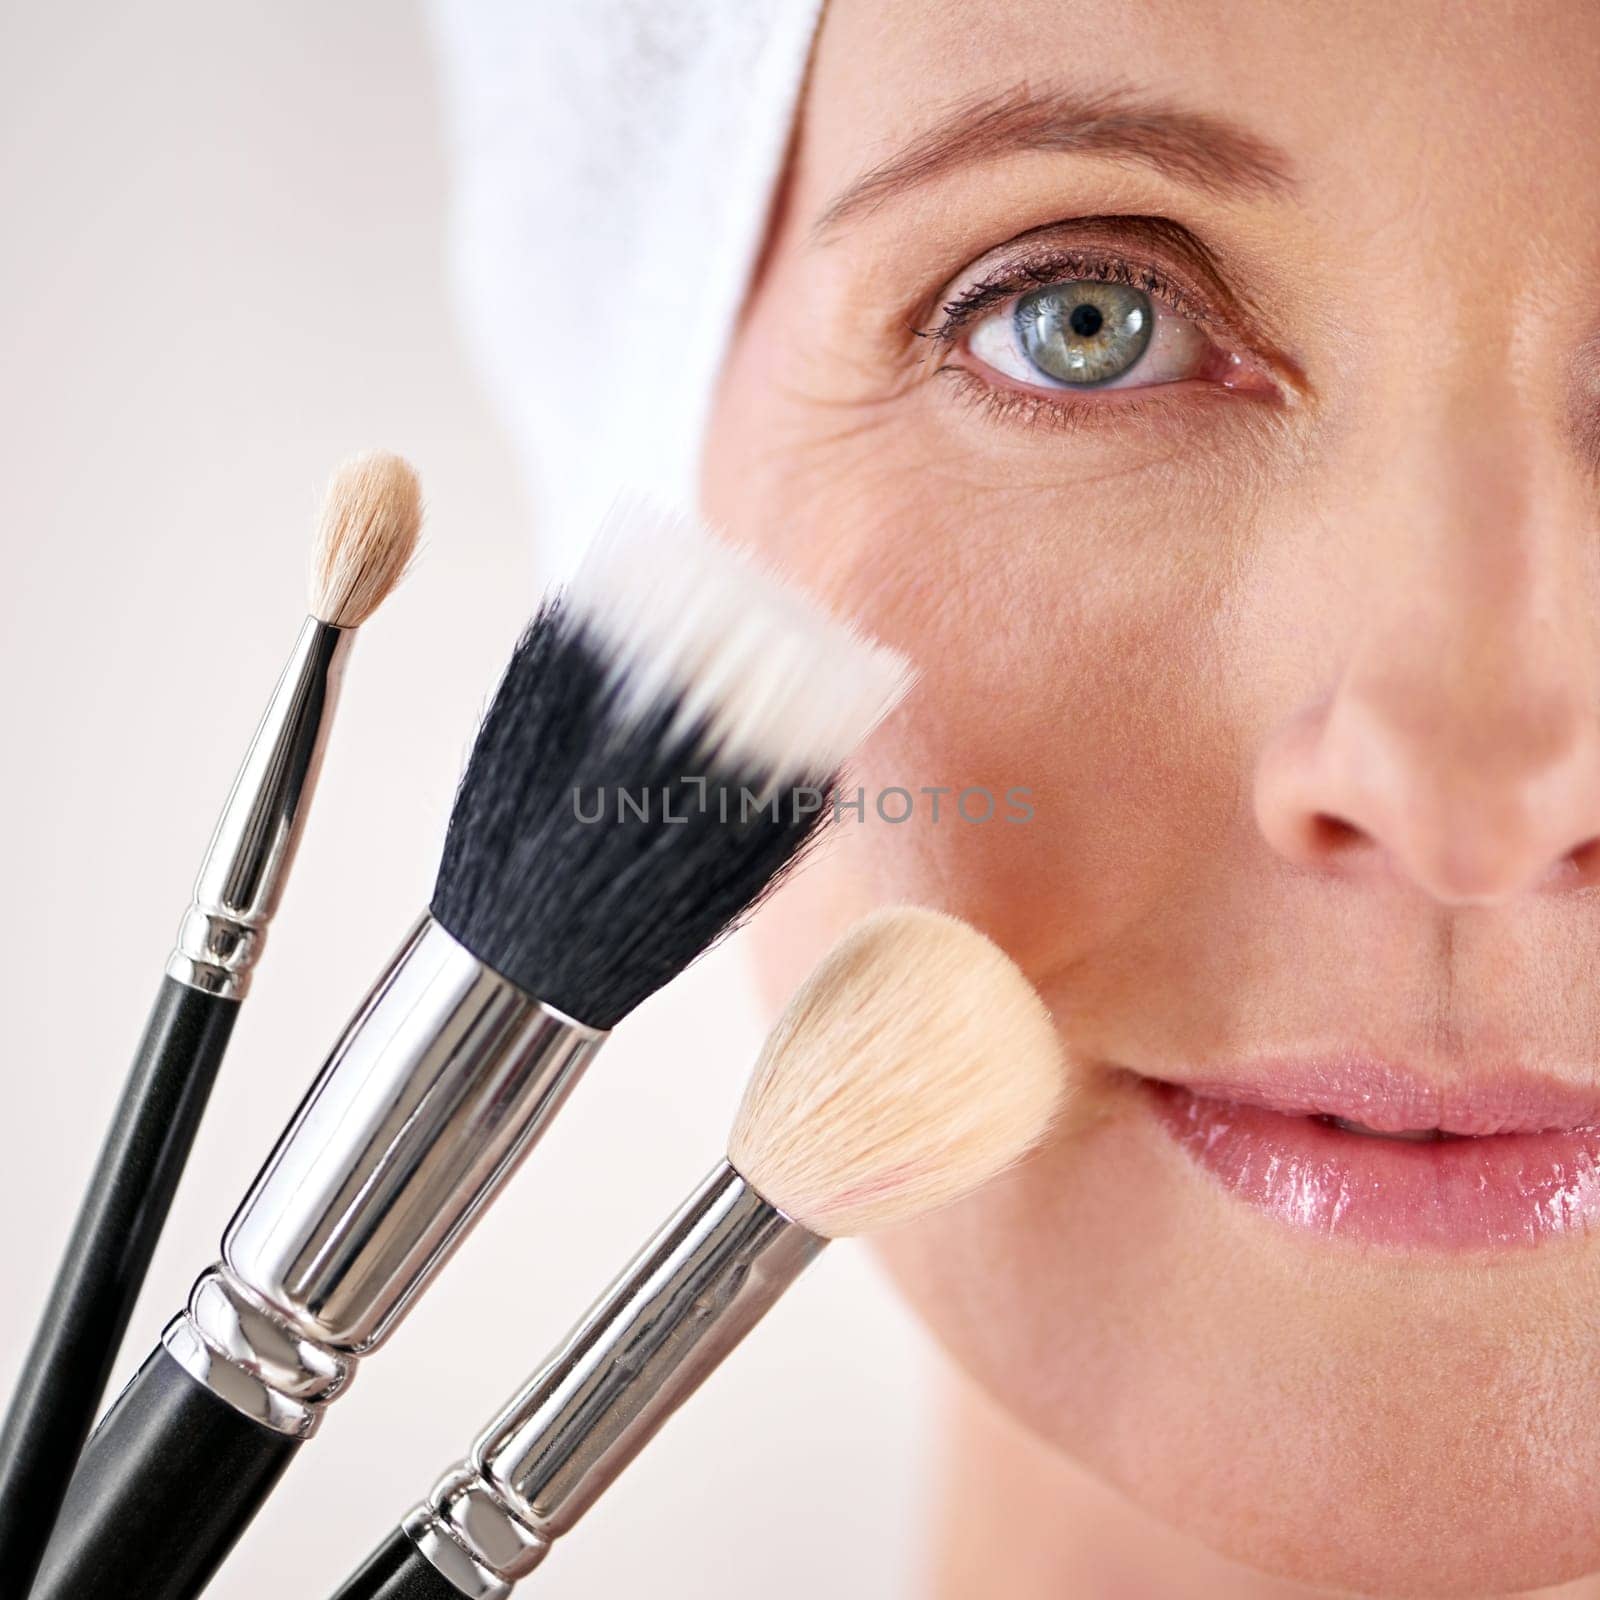 Beauty time. Closeup studio portrait of a mature woman posing with a set of makeup brushes